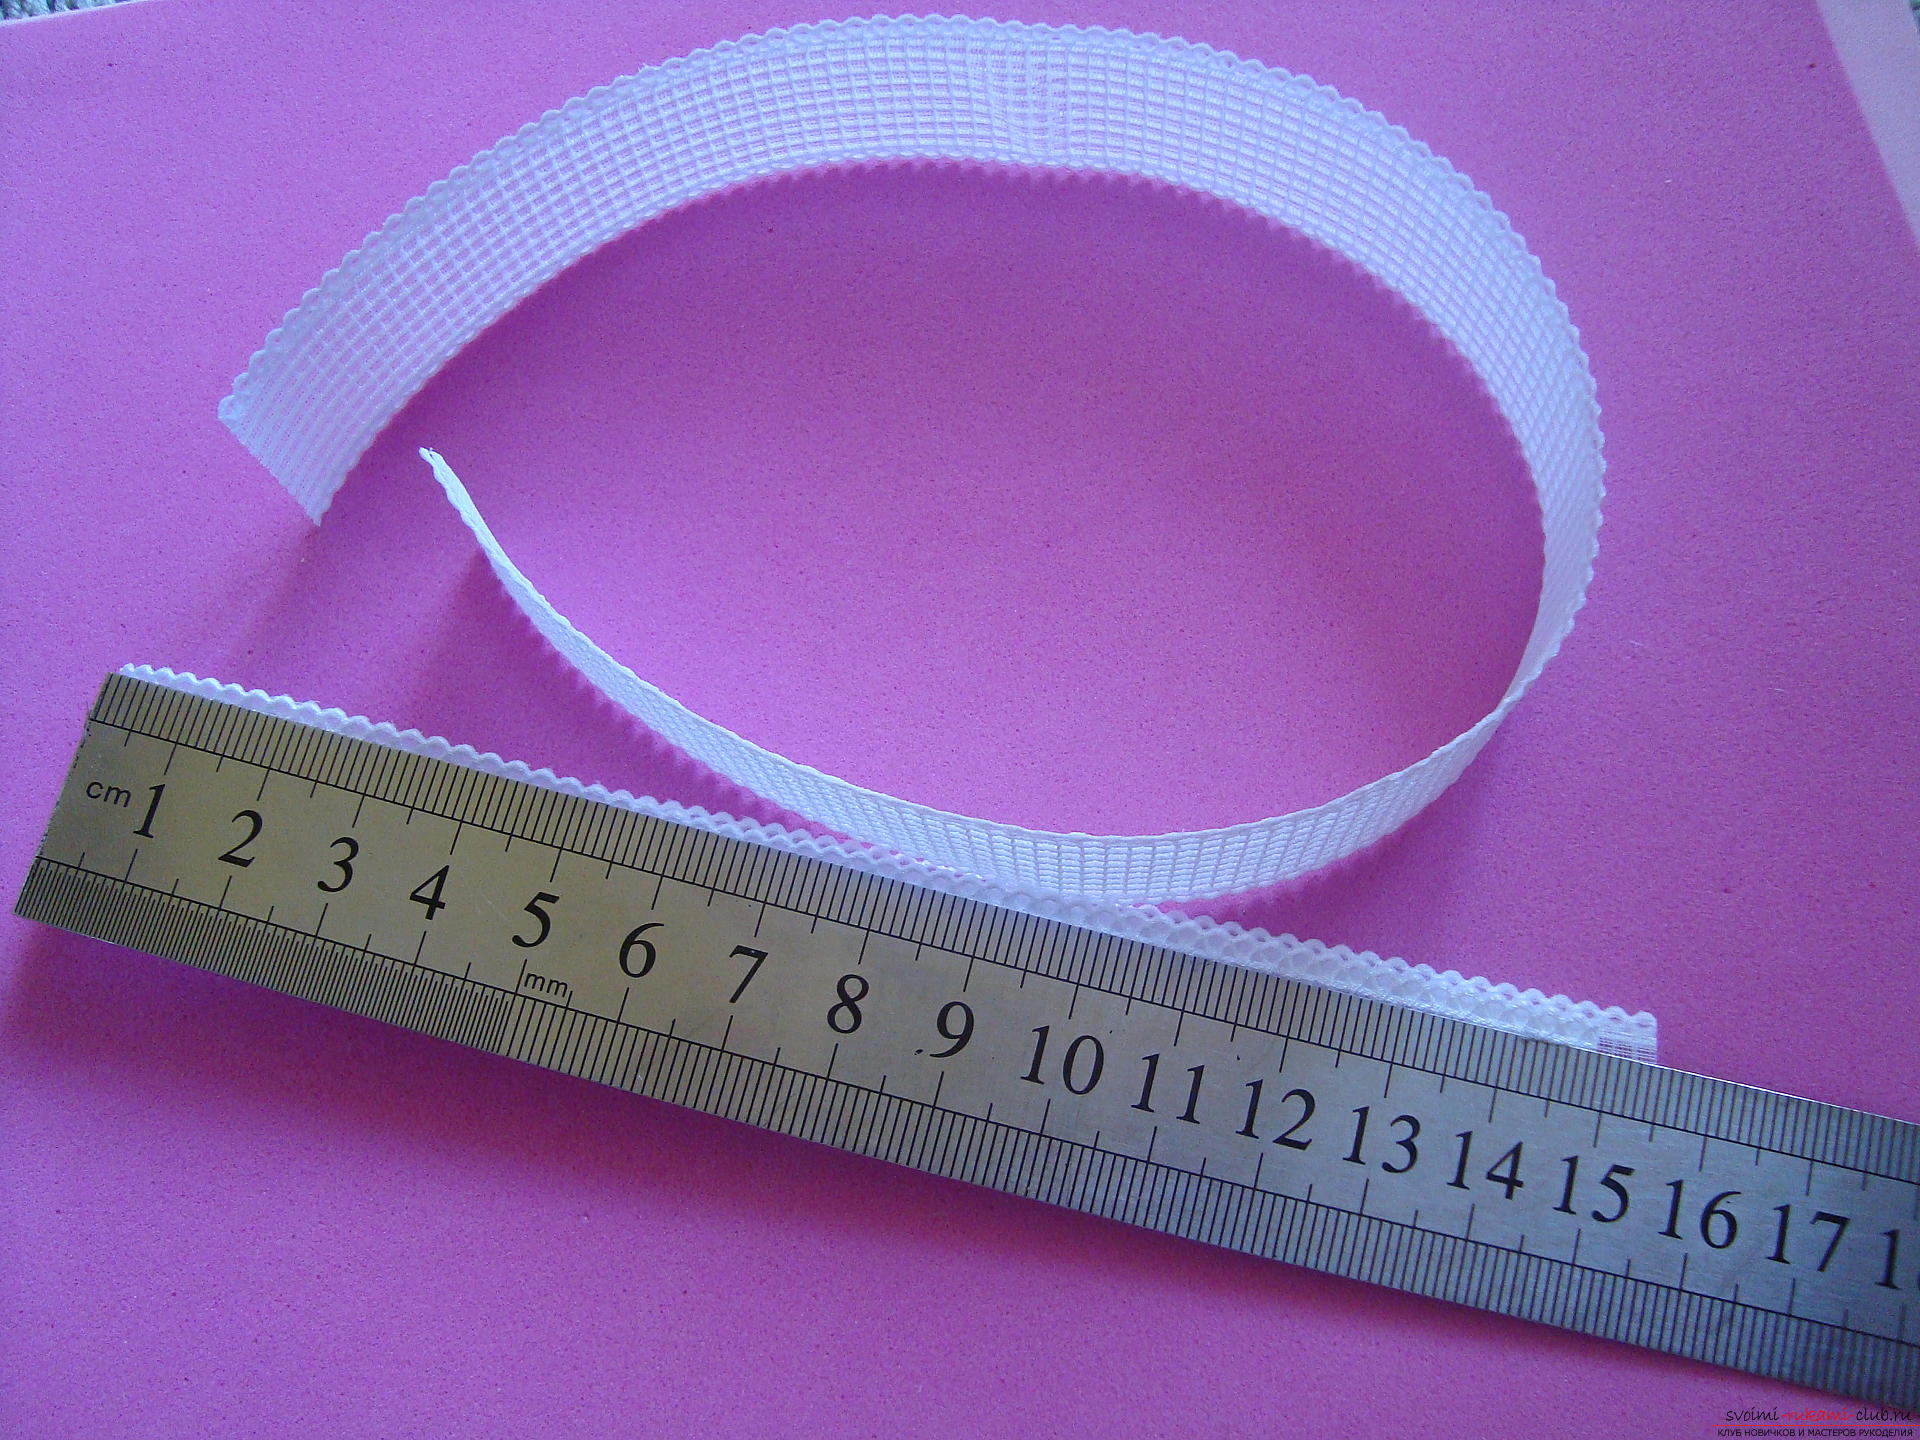 Step-by-step guide to making bows by September 1 for schoolgirls describing the steps and photos. Photo №6